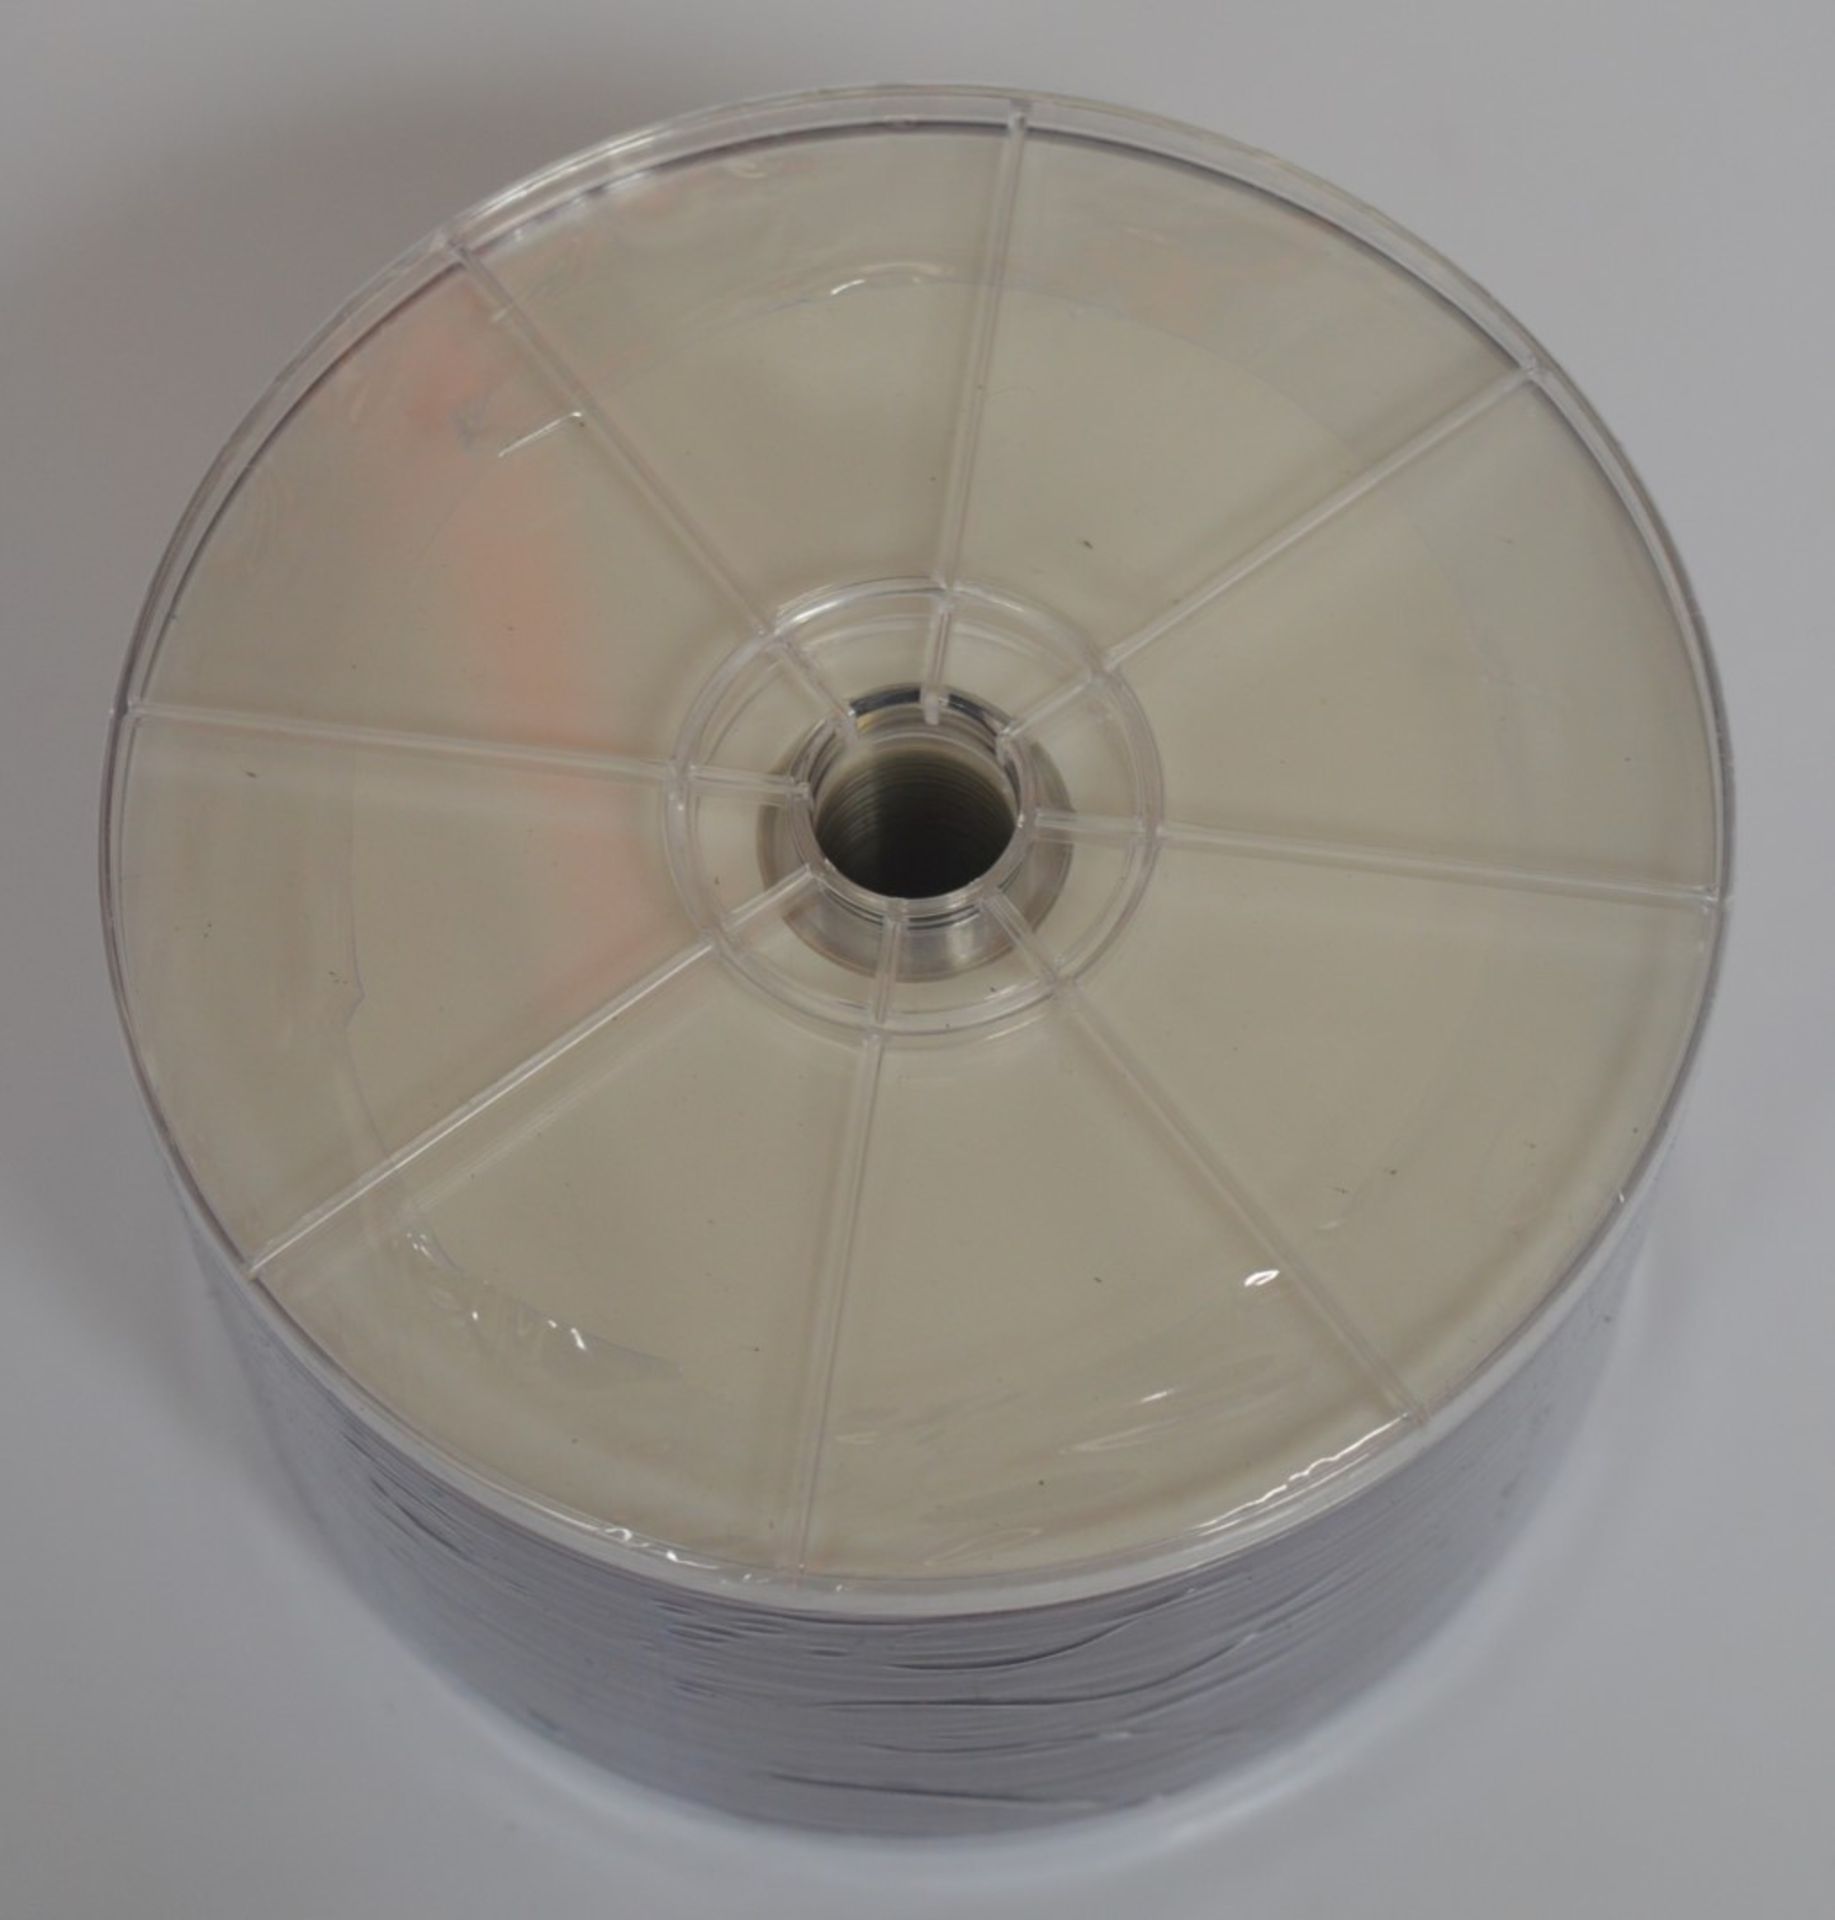 150 x Ritek Full Surface Thermal Printable DVDR 8X Discs - Includes 3 x 4.7gb Cake of 50 Discs - - Image 4 of 4